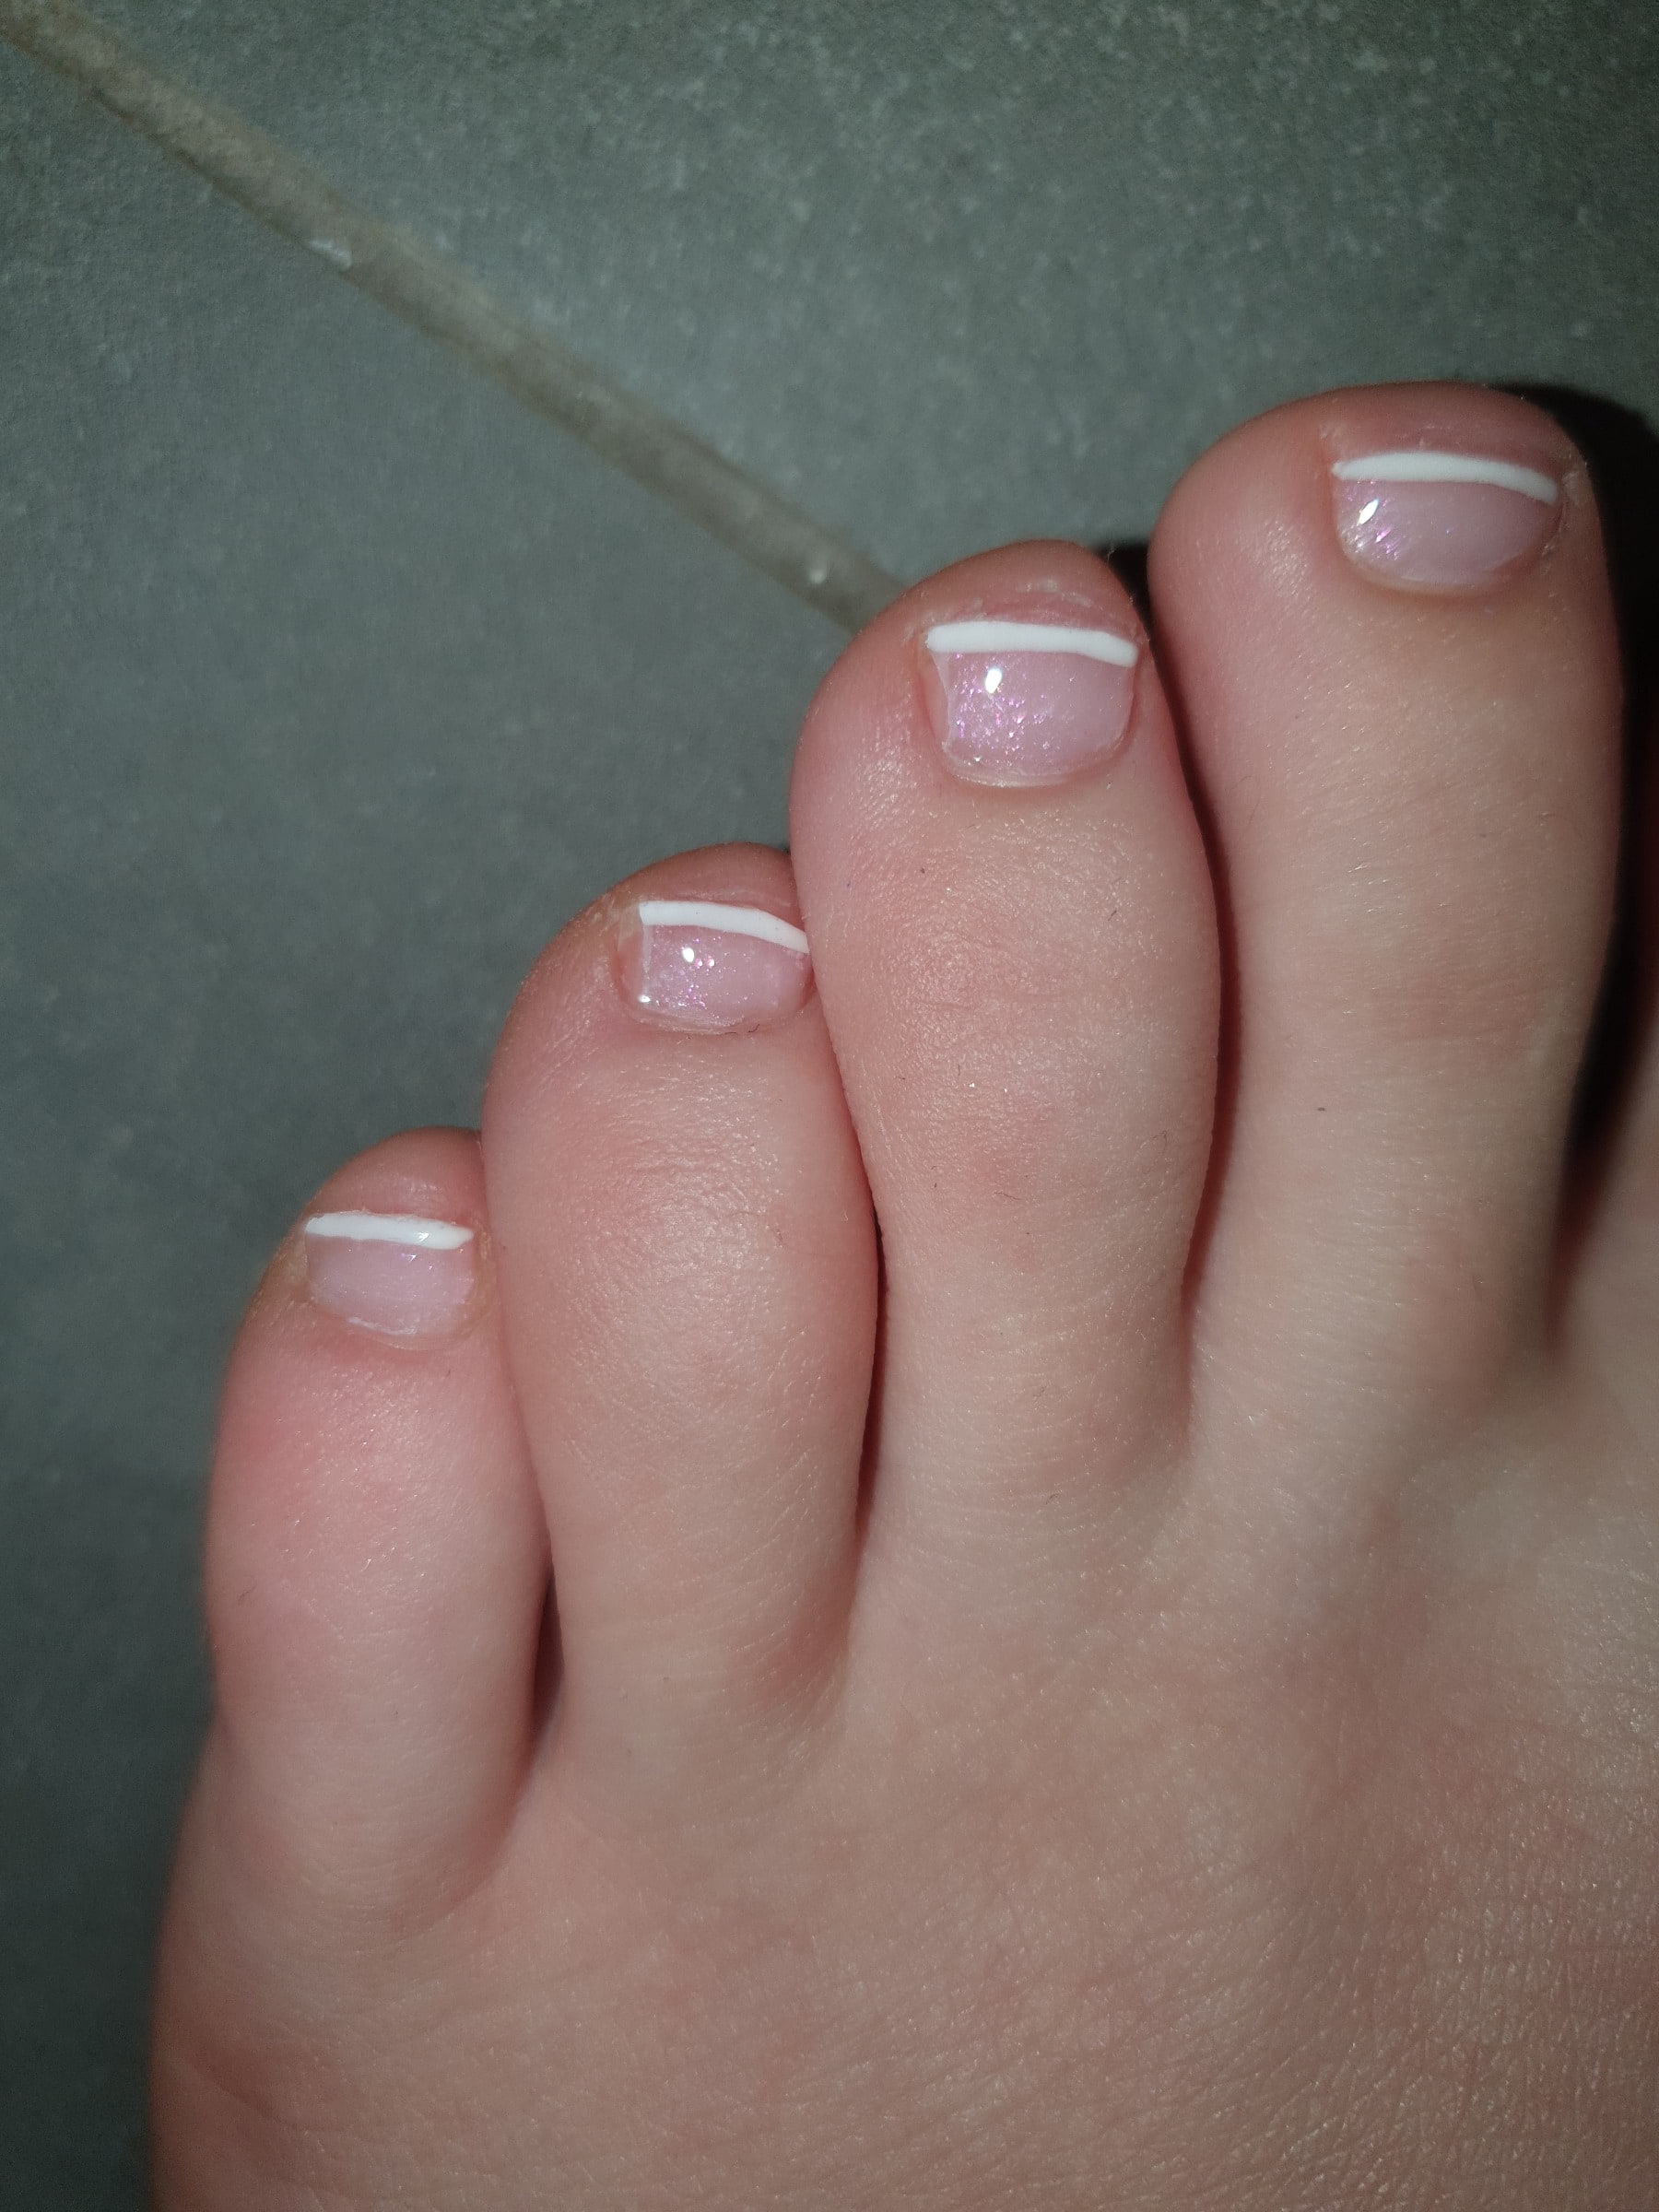 Lossnat i hörnen, ojämnt – Photo from Hollywood Nails Center by Claudia L. (26/06/2020)